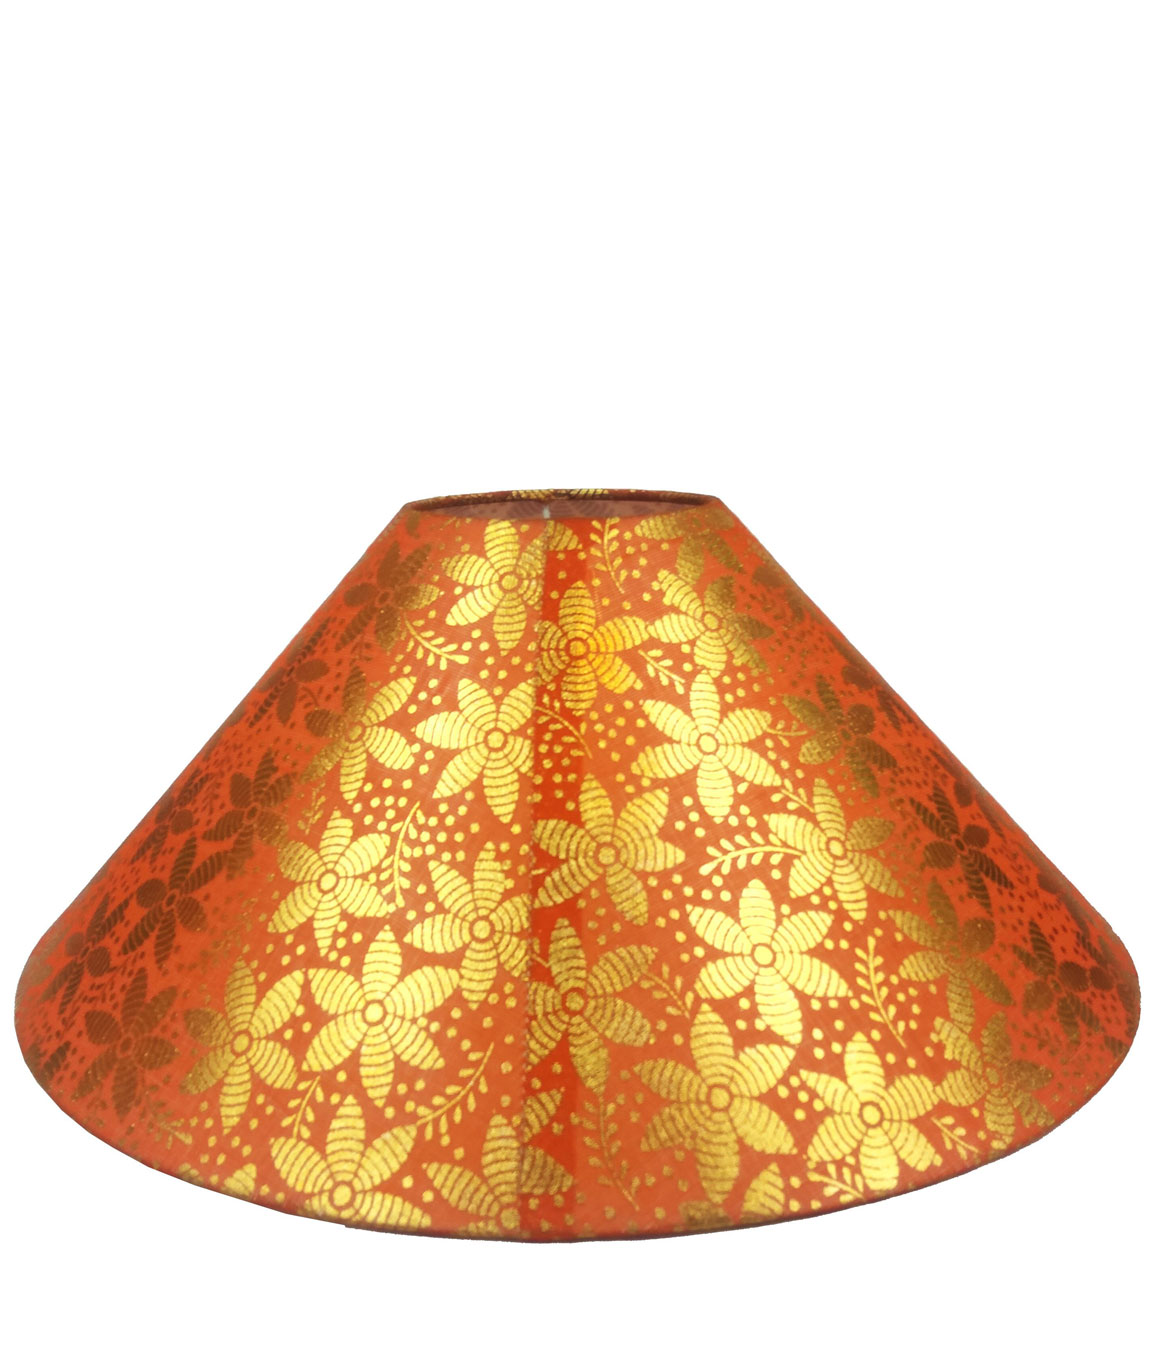 RDC 13 Inches Round Orange with Golden Designer Lamp Shade for Table Lamp